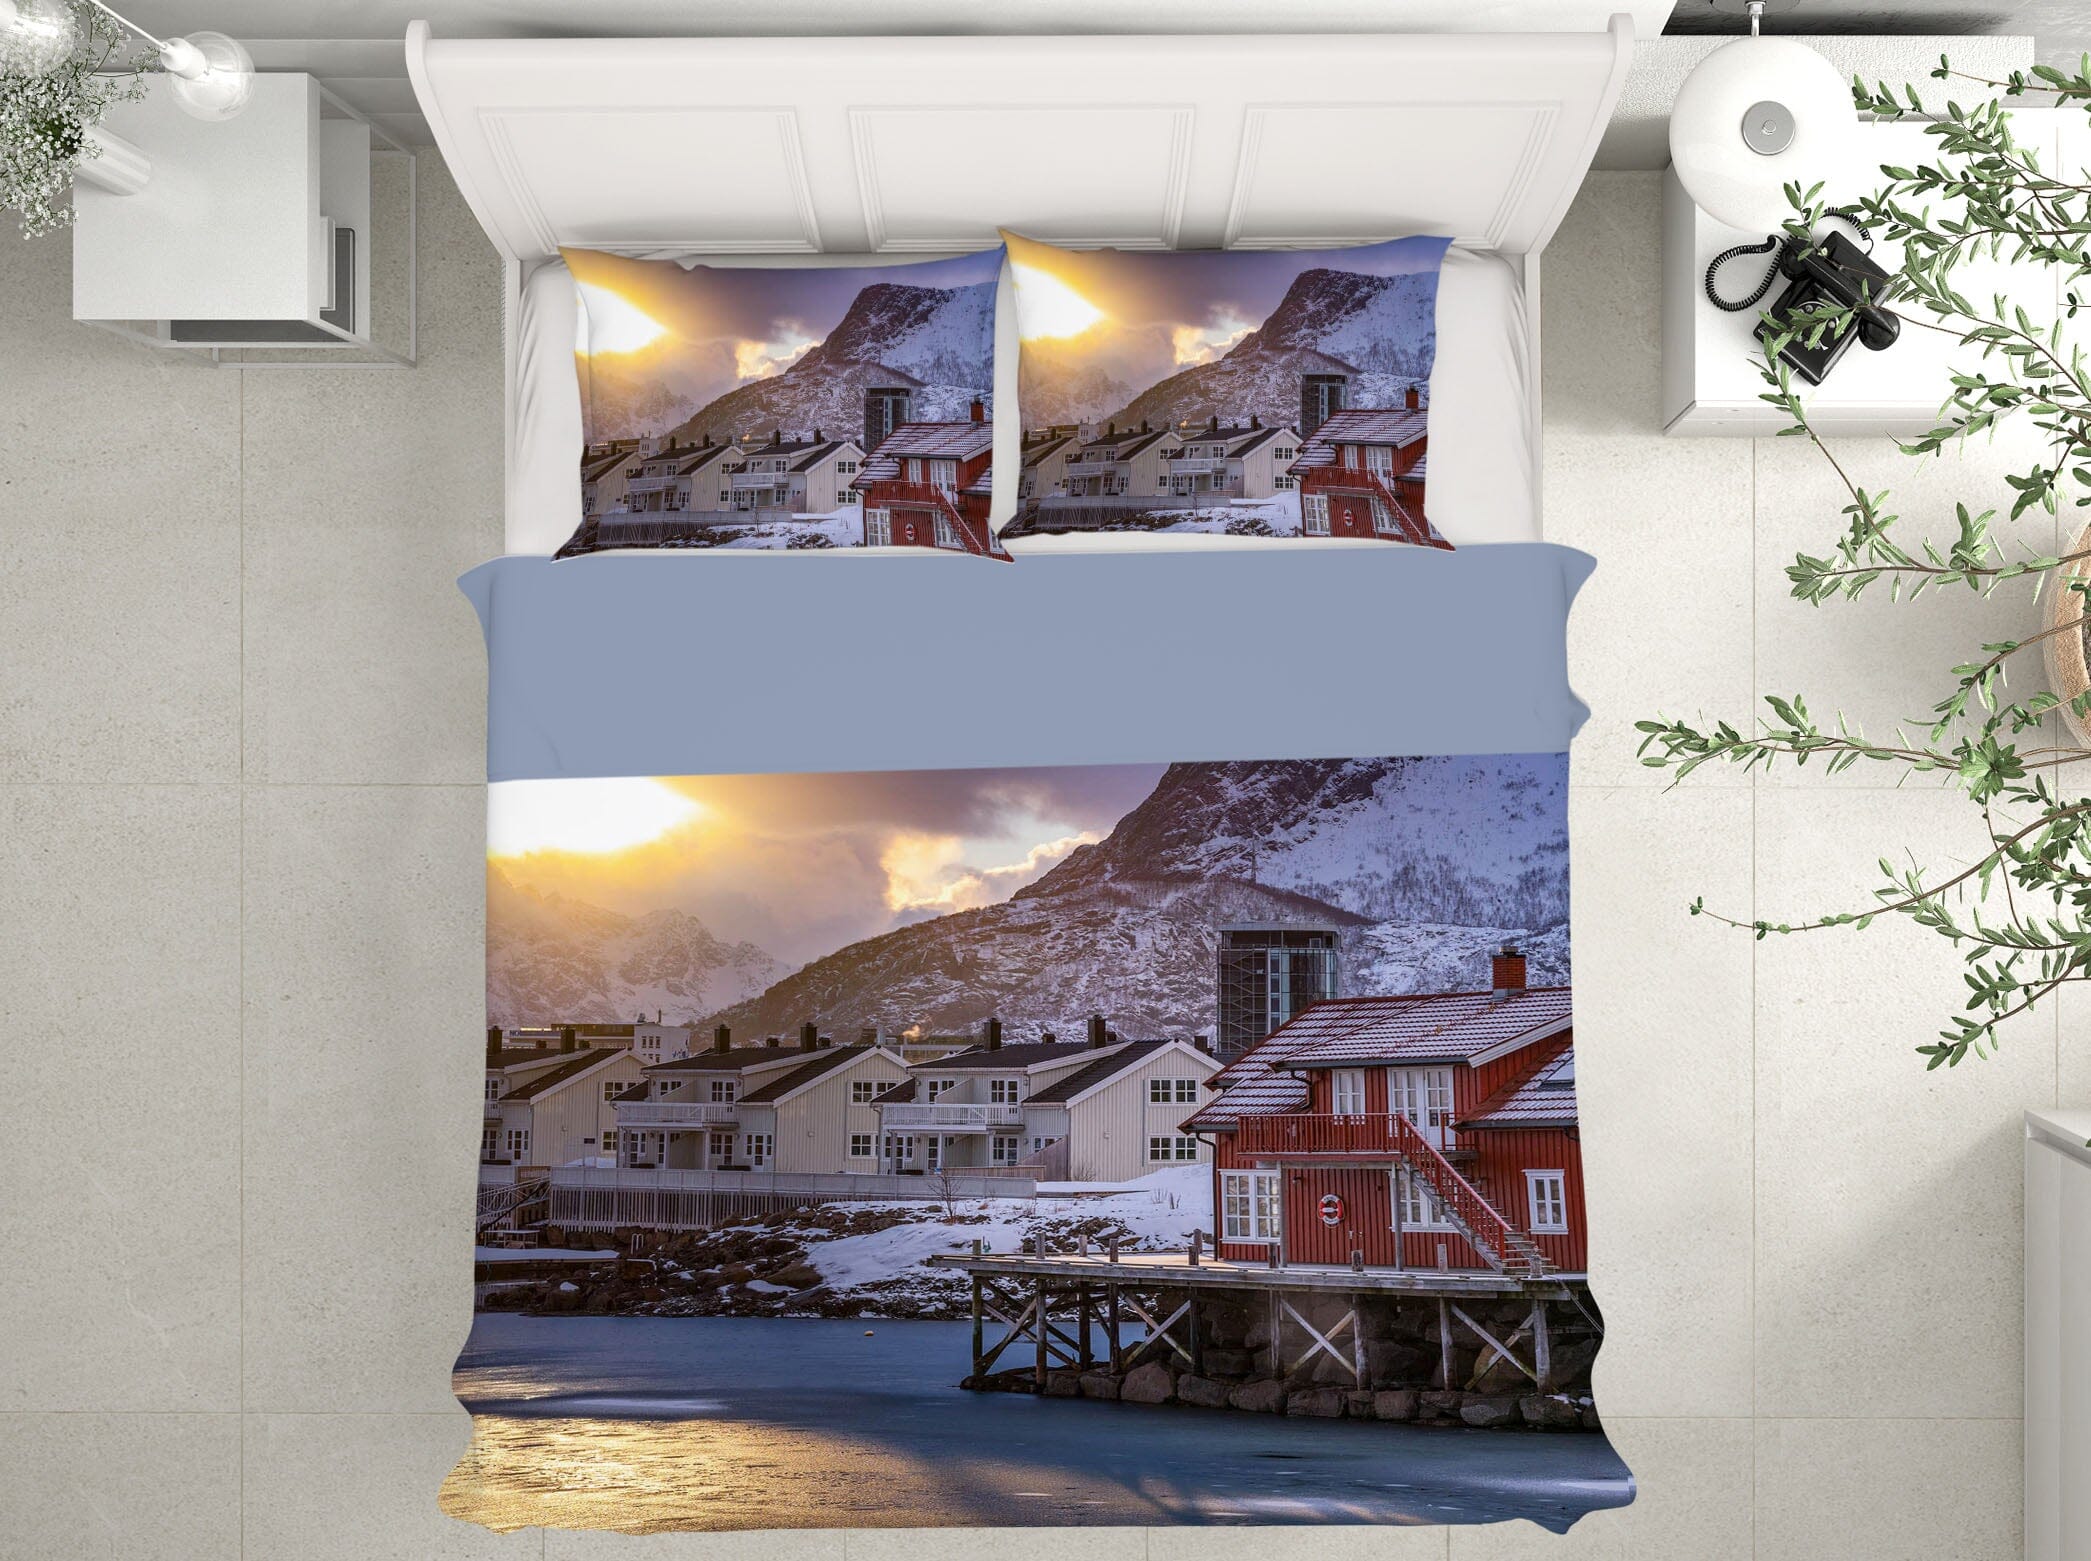 3D Good Morning 2144 Marco Carmassi Bedding Bed Pillowcases Quilt Quiet Covers AJ Creativity Home 